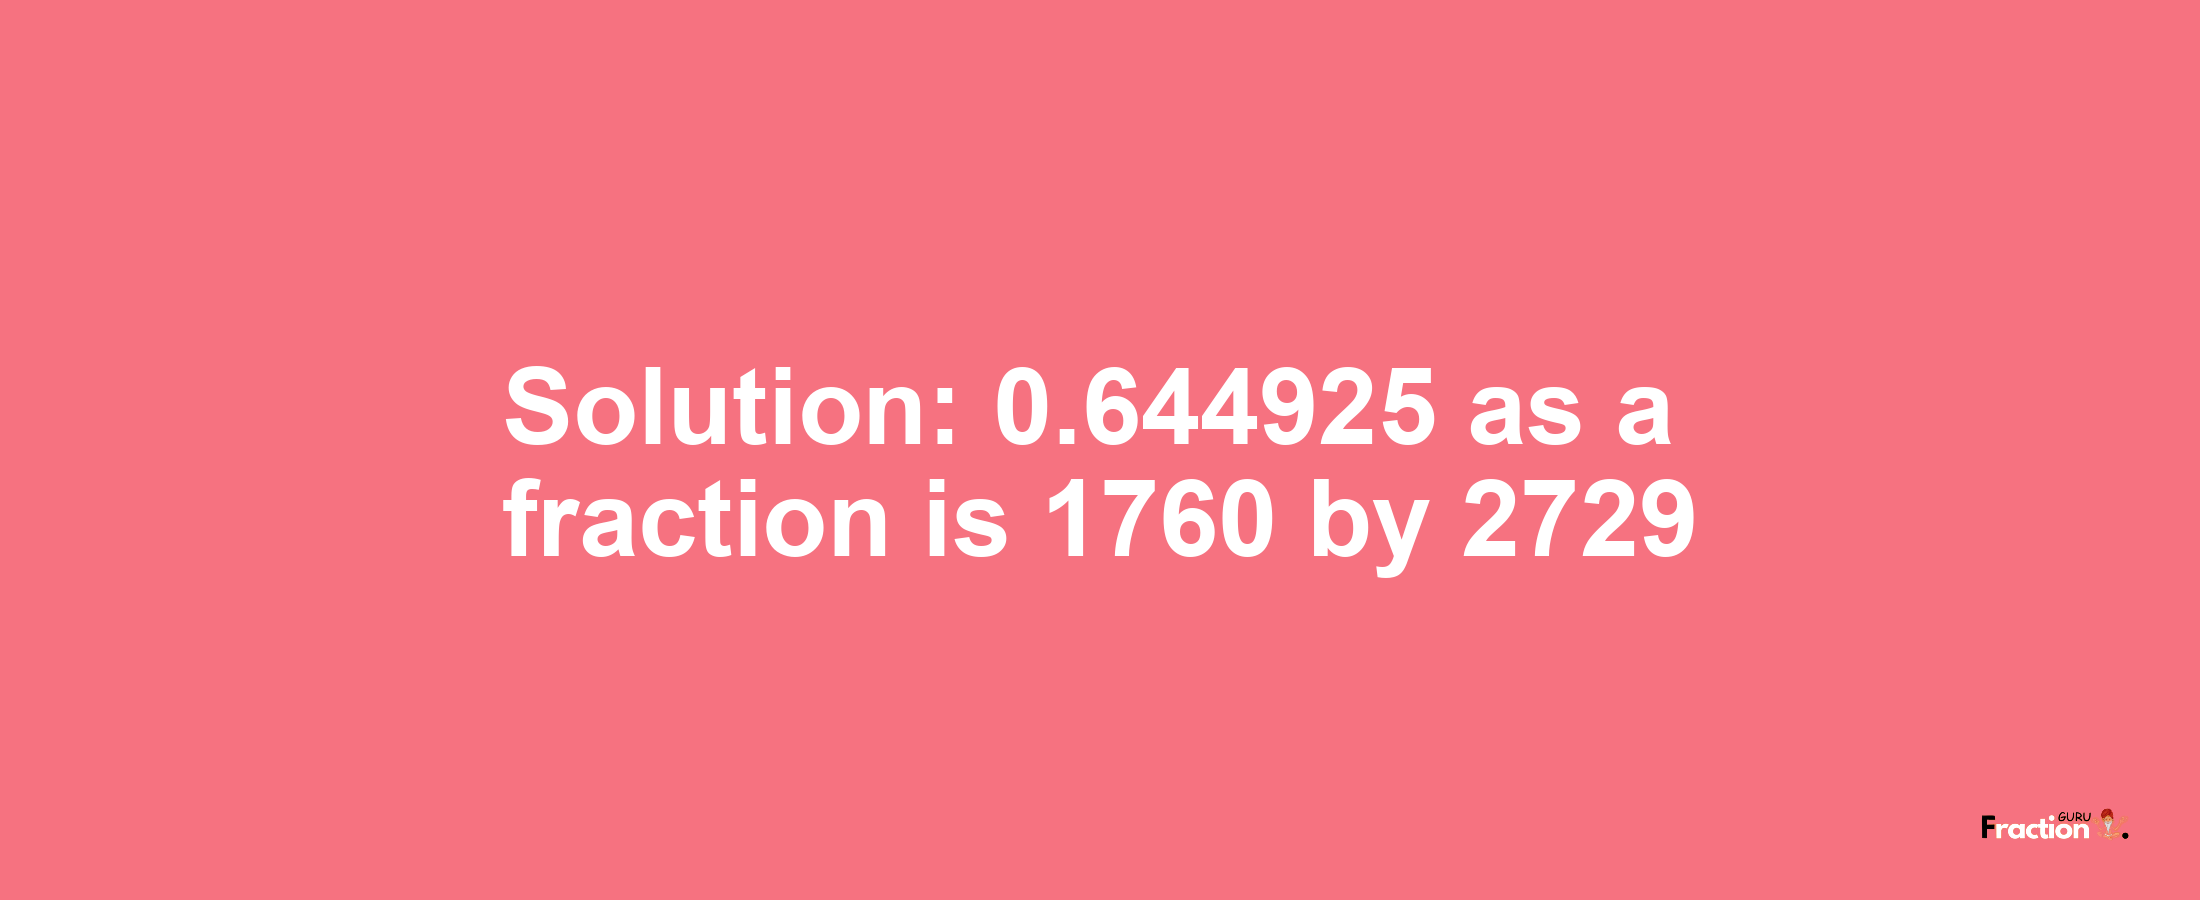 Solution:0.644925 as a fraction is 1760/2729